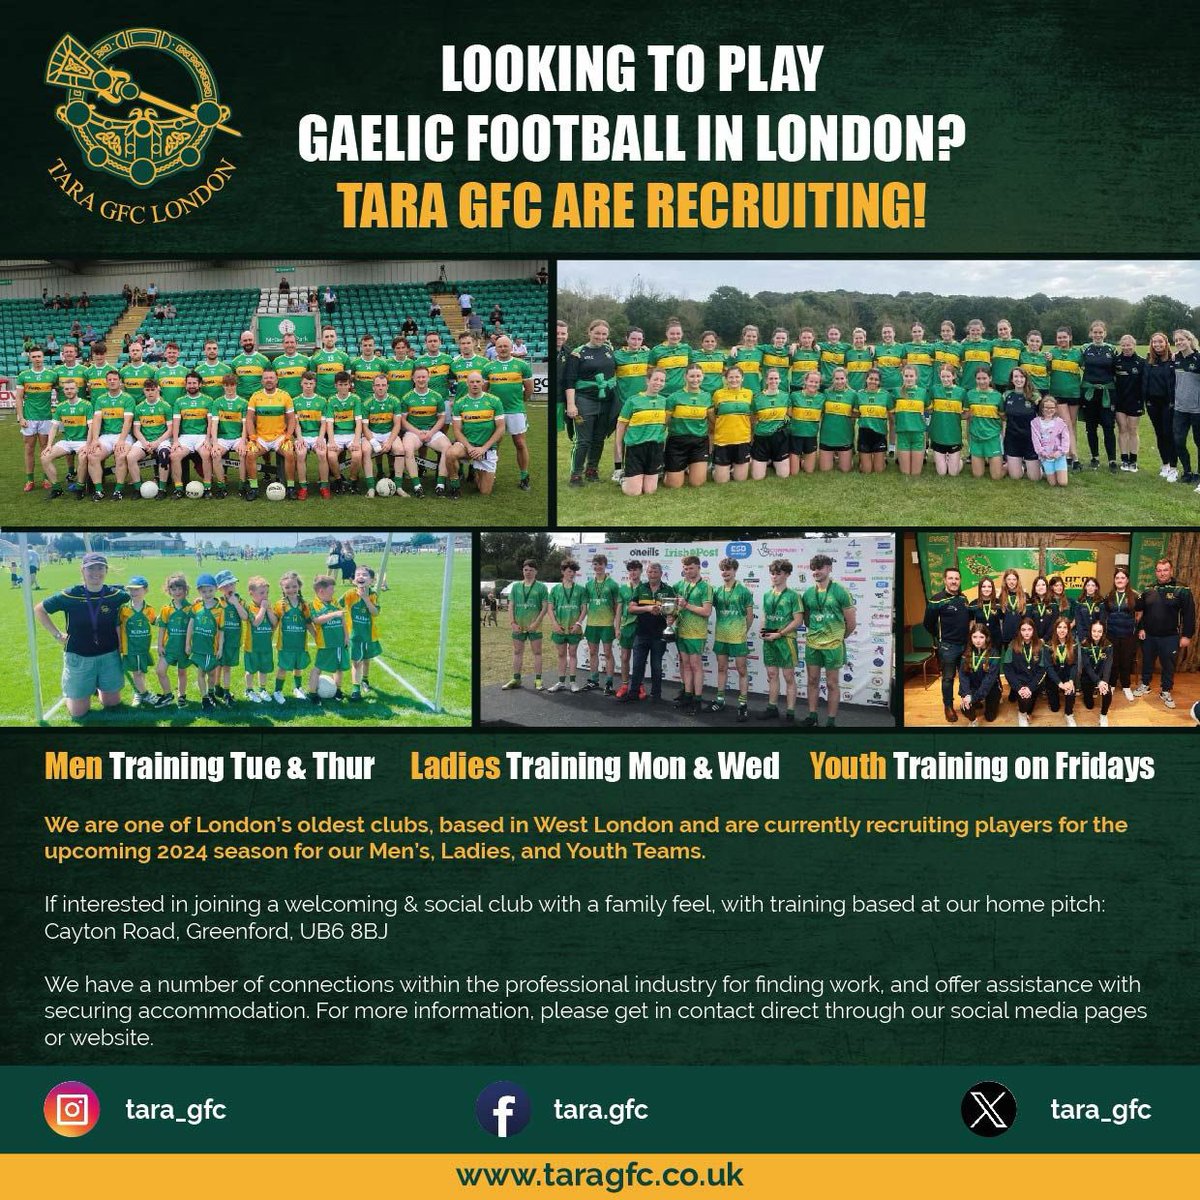 Tara GFC are now recruiting for the 2024 season in the men’s, ladies and youth teams. All new players welcome! Based in West London, we are one of London’s oldest clubs with a proud history. We are a friendly, well run and sociable club. Please get in touch to find out more